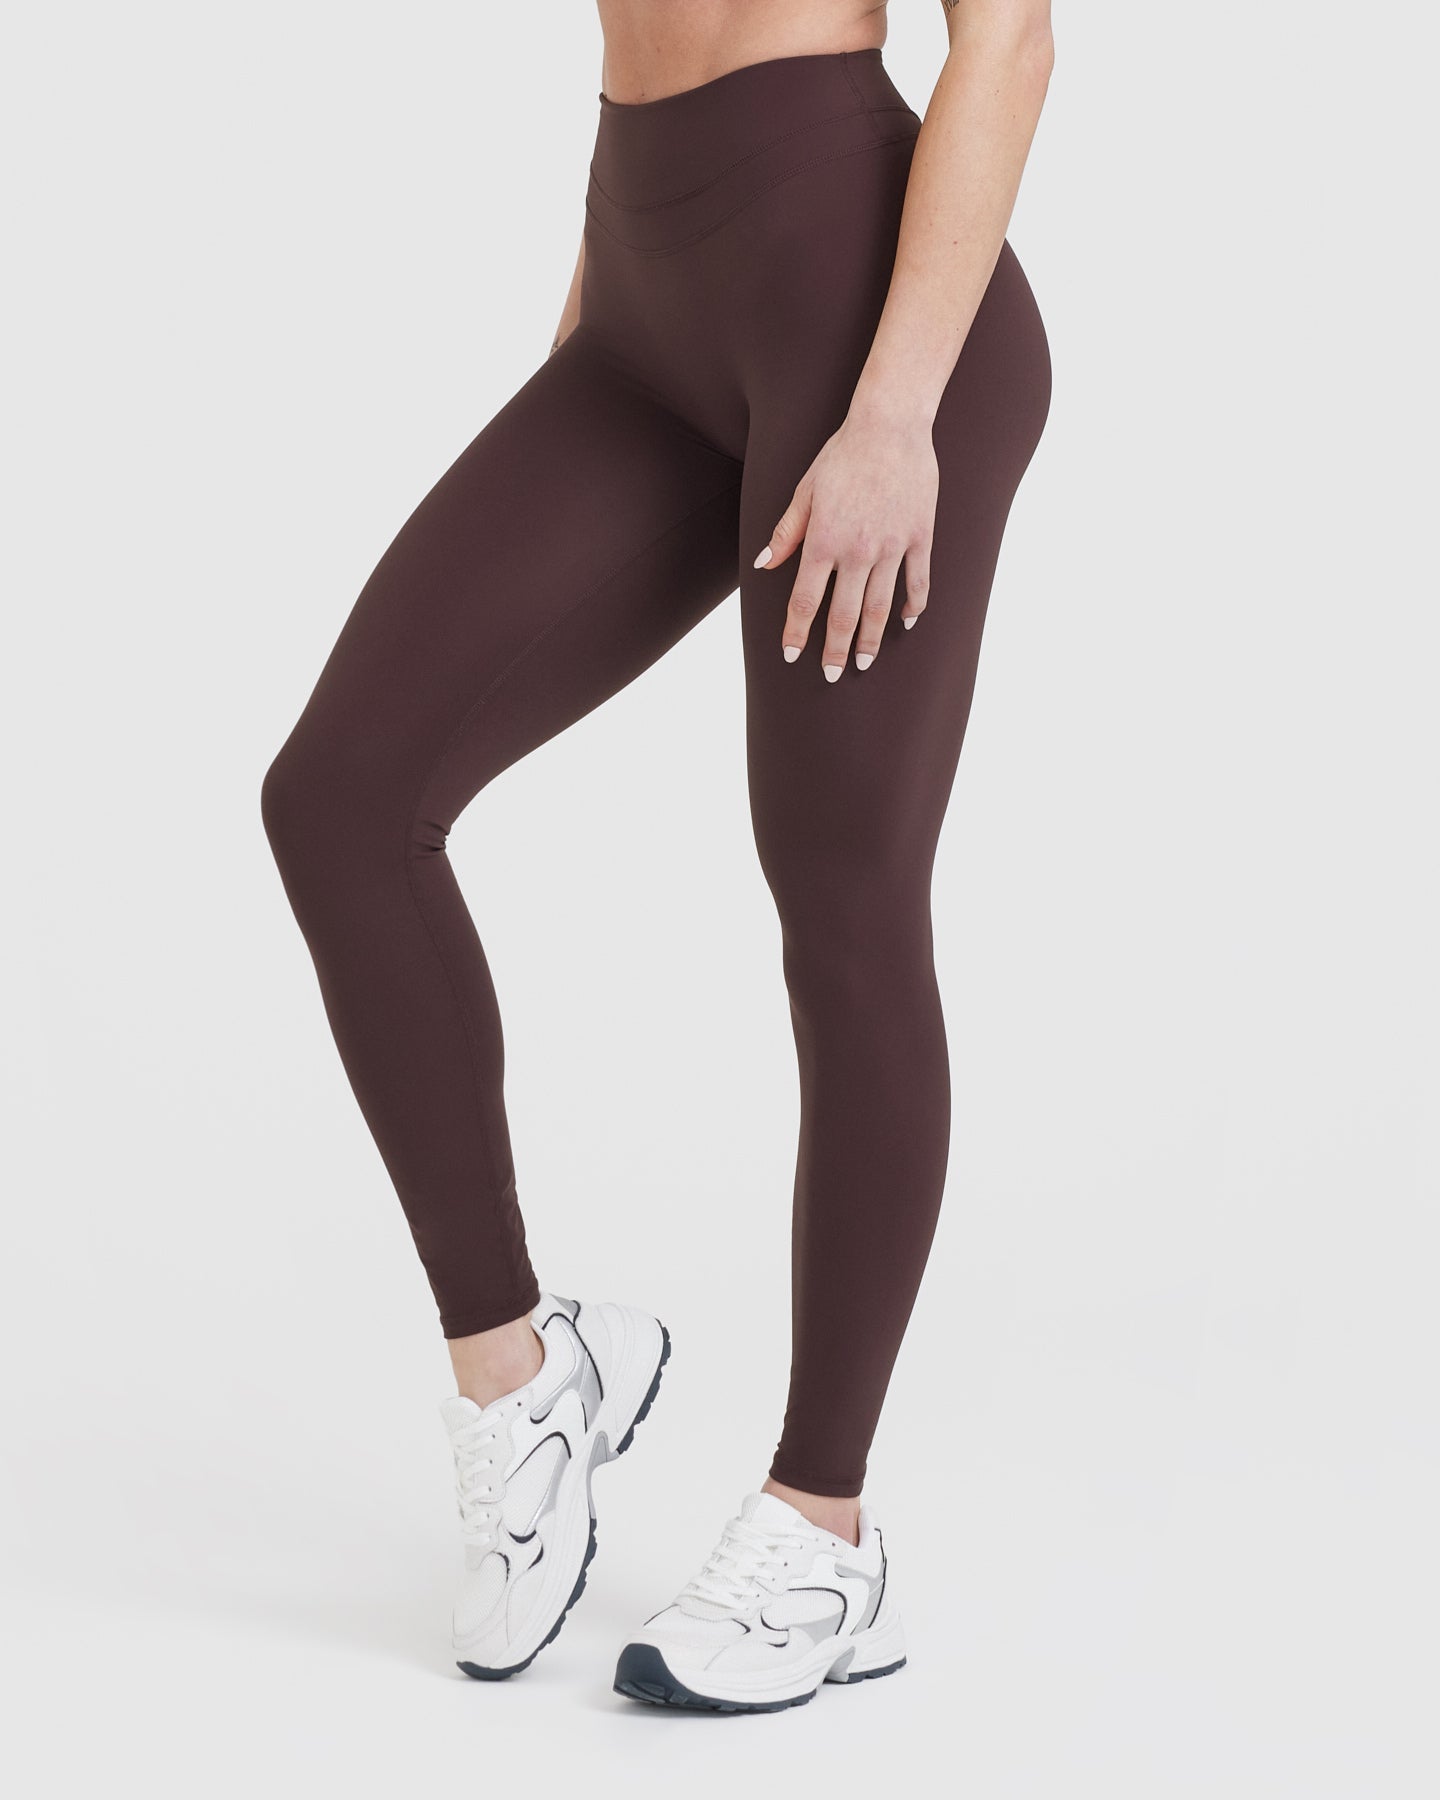 Essential Ultra High Waist Tights - Taupe Brown